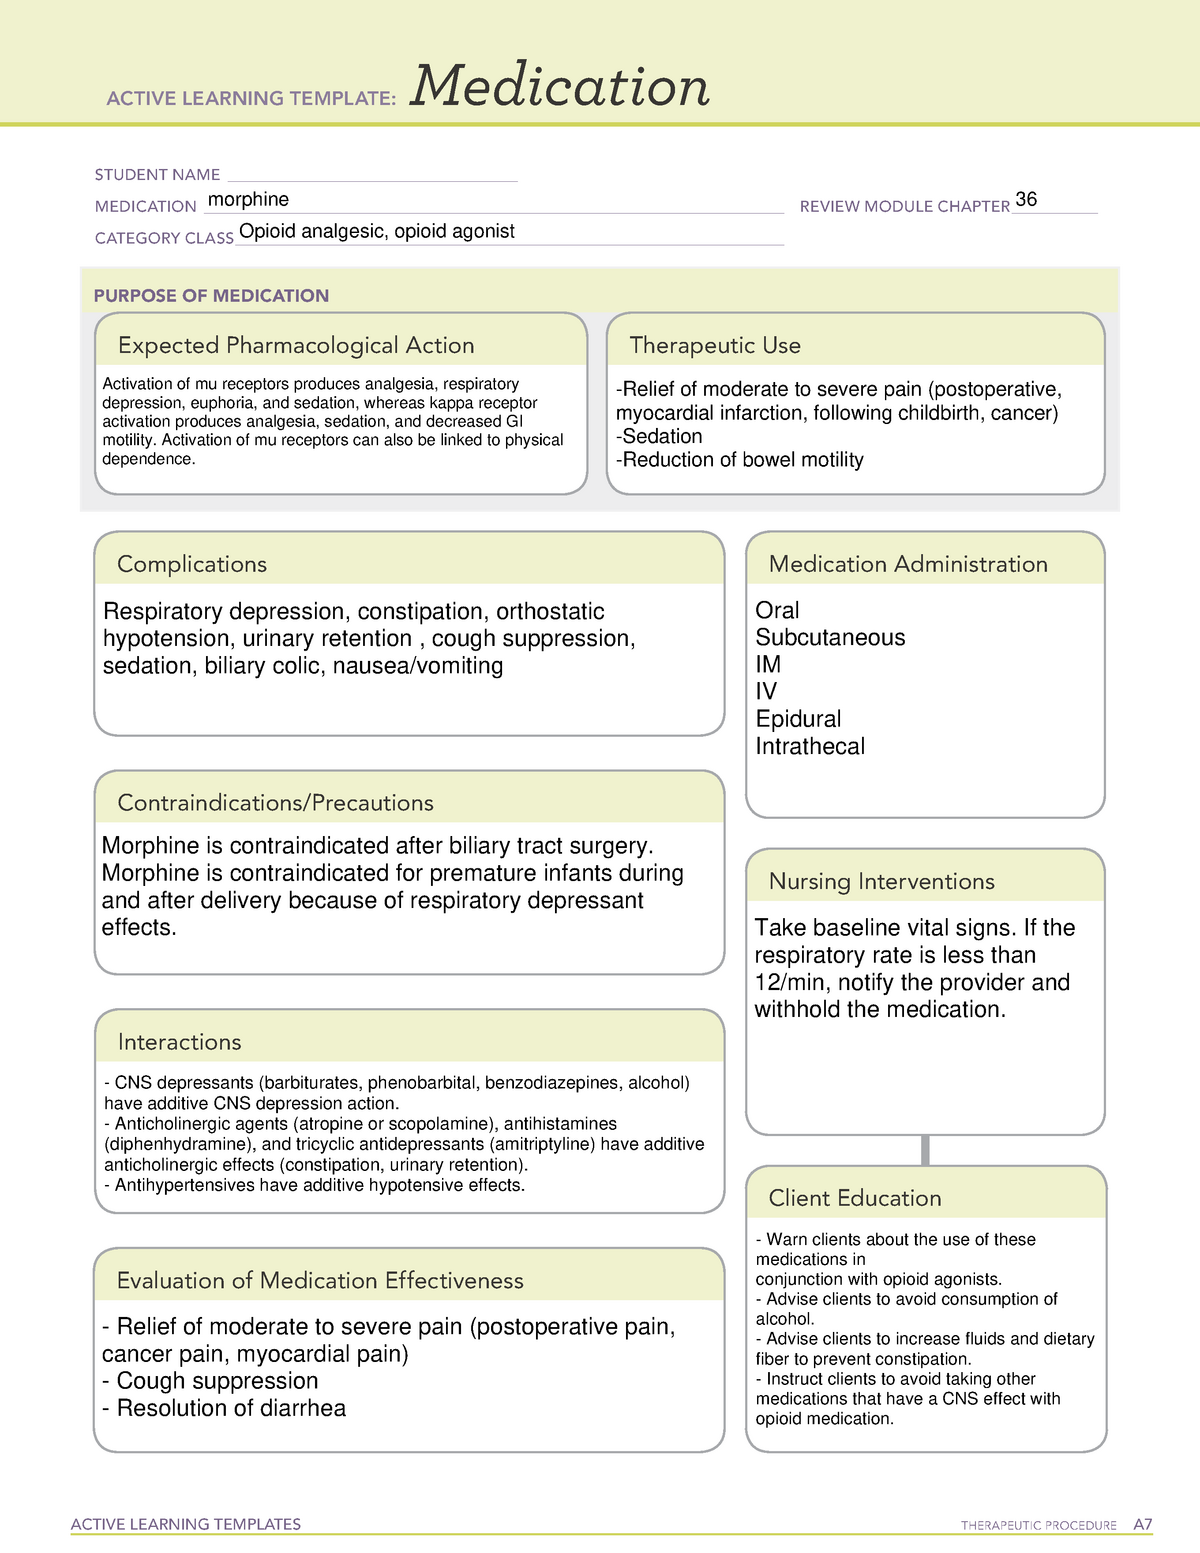 Morphine Summary RN Pharmacology for Nursing Edition 7 0 ACTIVE